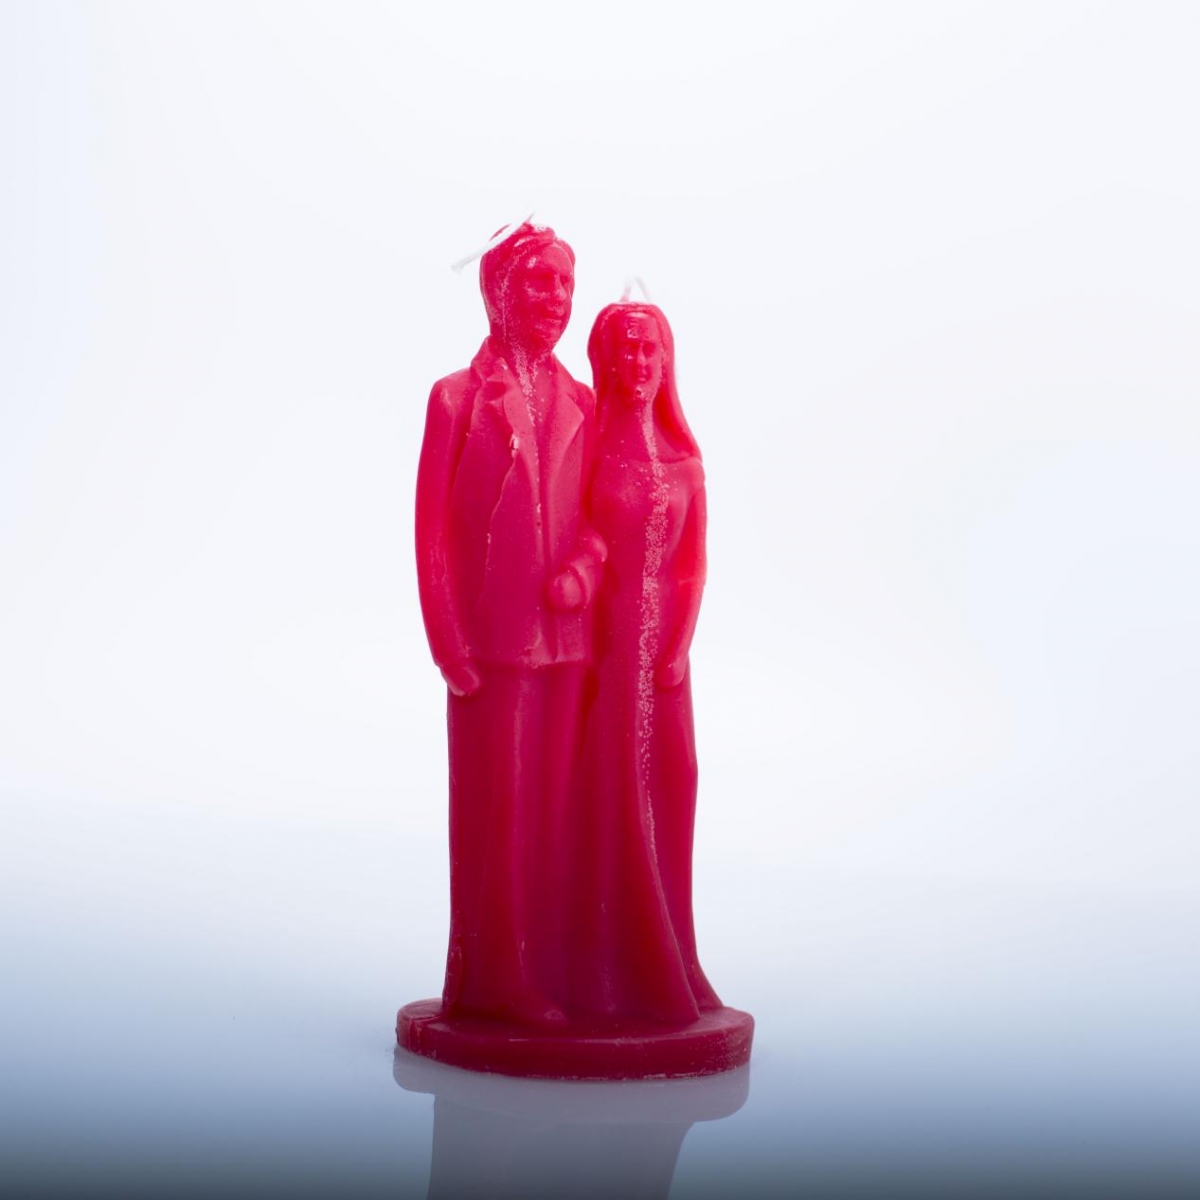 Memorial Candles：Man Woman Body Figure , Beeswax Sculpture ,Wedding ,Memorial Day ,China Factory ,Price-HOWCANDLE-Candles,Scented Candles,Aromatherapy Candles,Soy Candles,Vegan Candles,Jar Candles,Pillar Candles,Candle Gift Sets,Essential Oils,Reed Diffuser,Candle Holder,